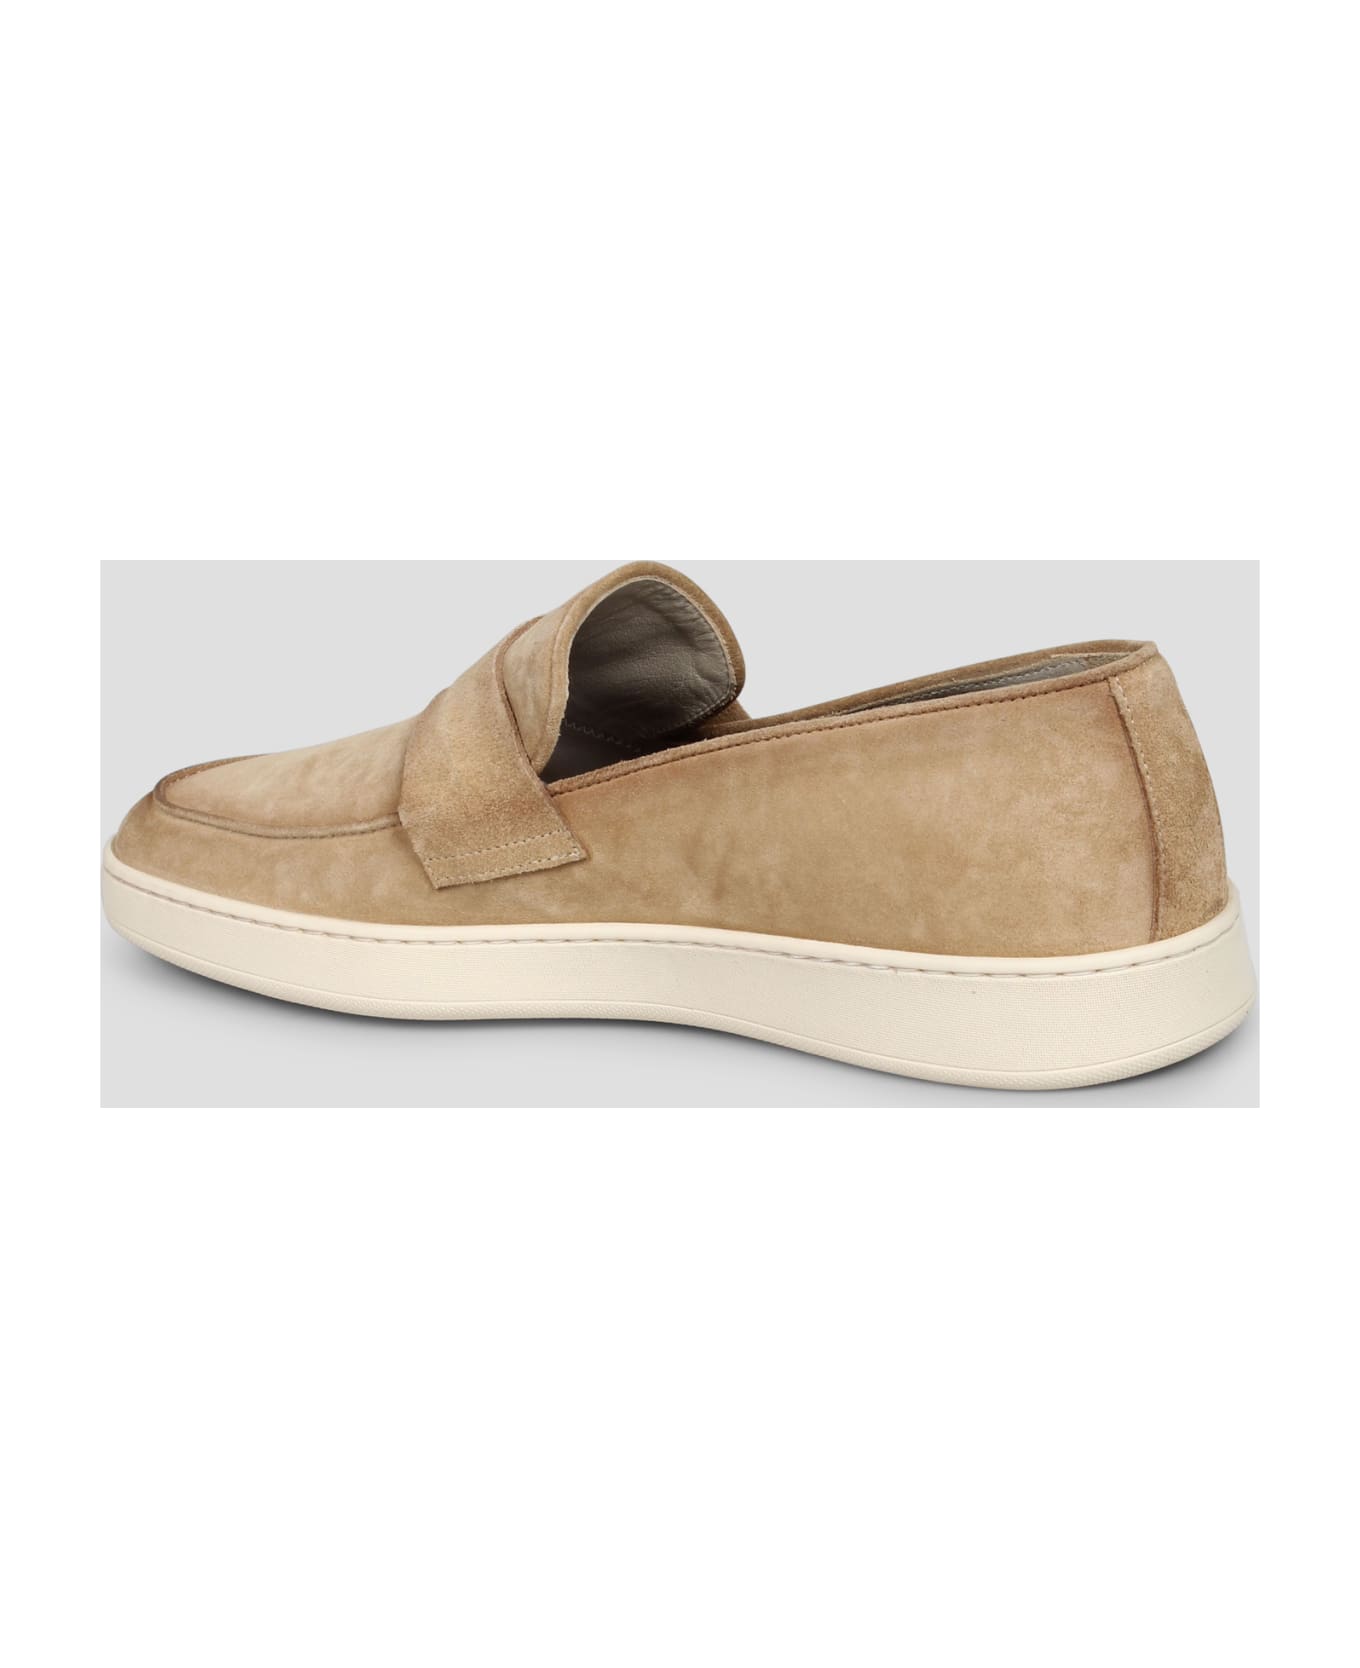 Corvari Boat Penny Loafers - Nude & Neutrals